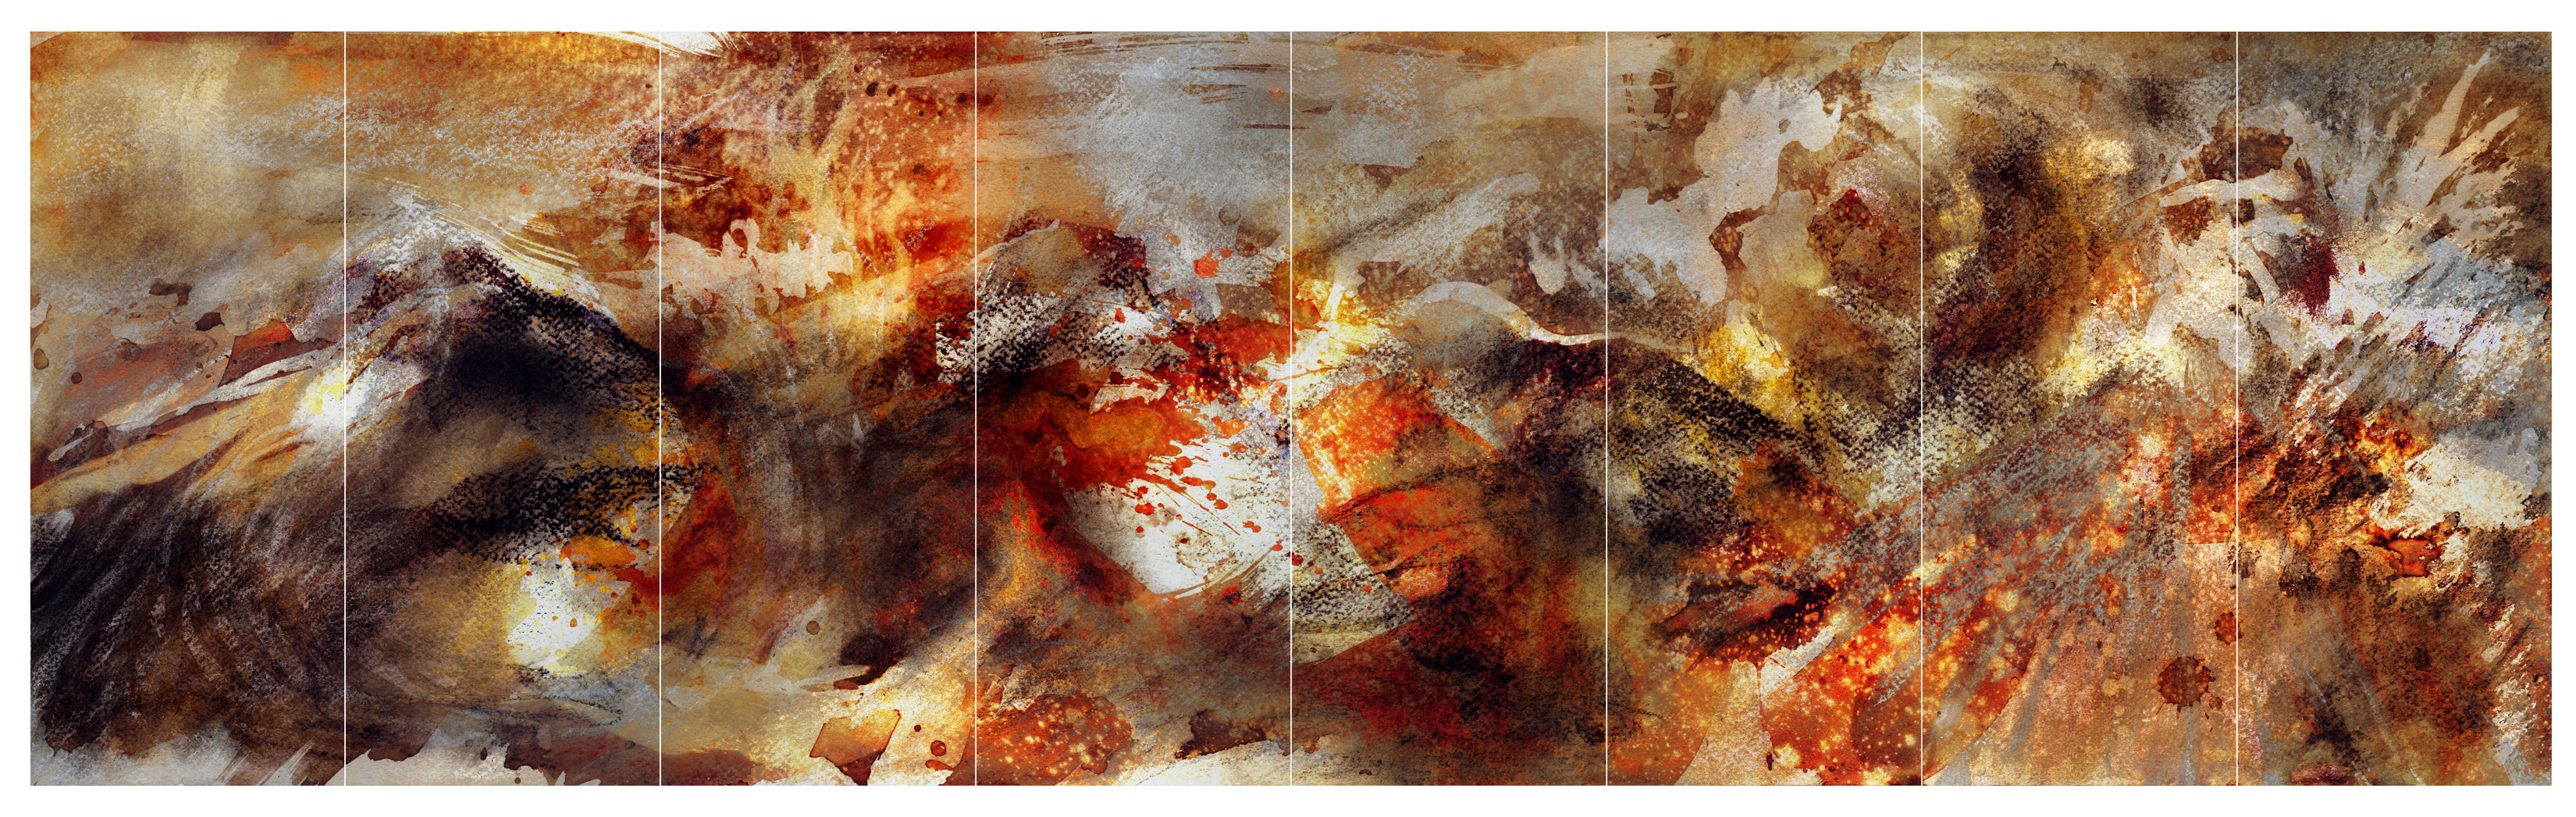 mural, giclee, digital painting, muralism, mountains, Andes, Chile, landscape, earth, volcano, eruption, lava